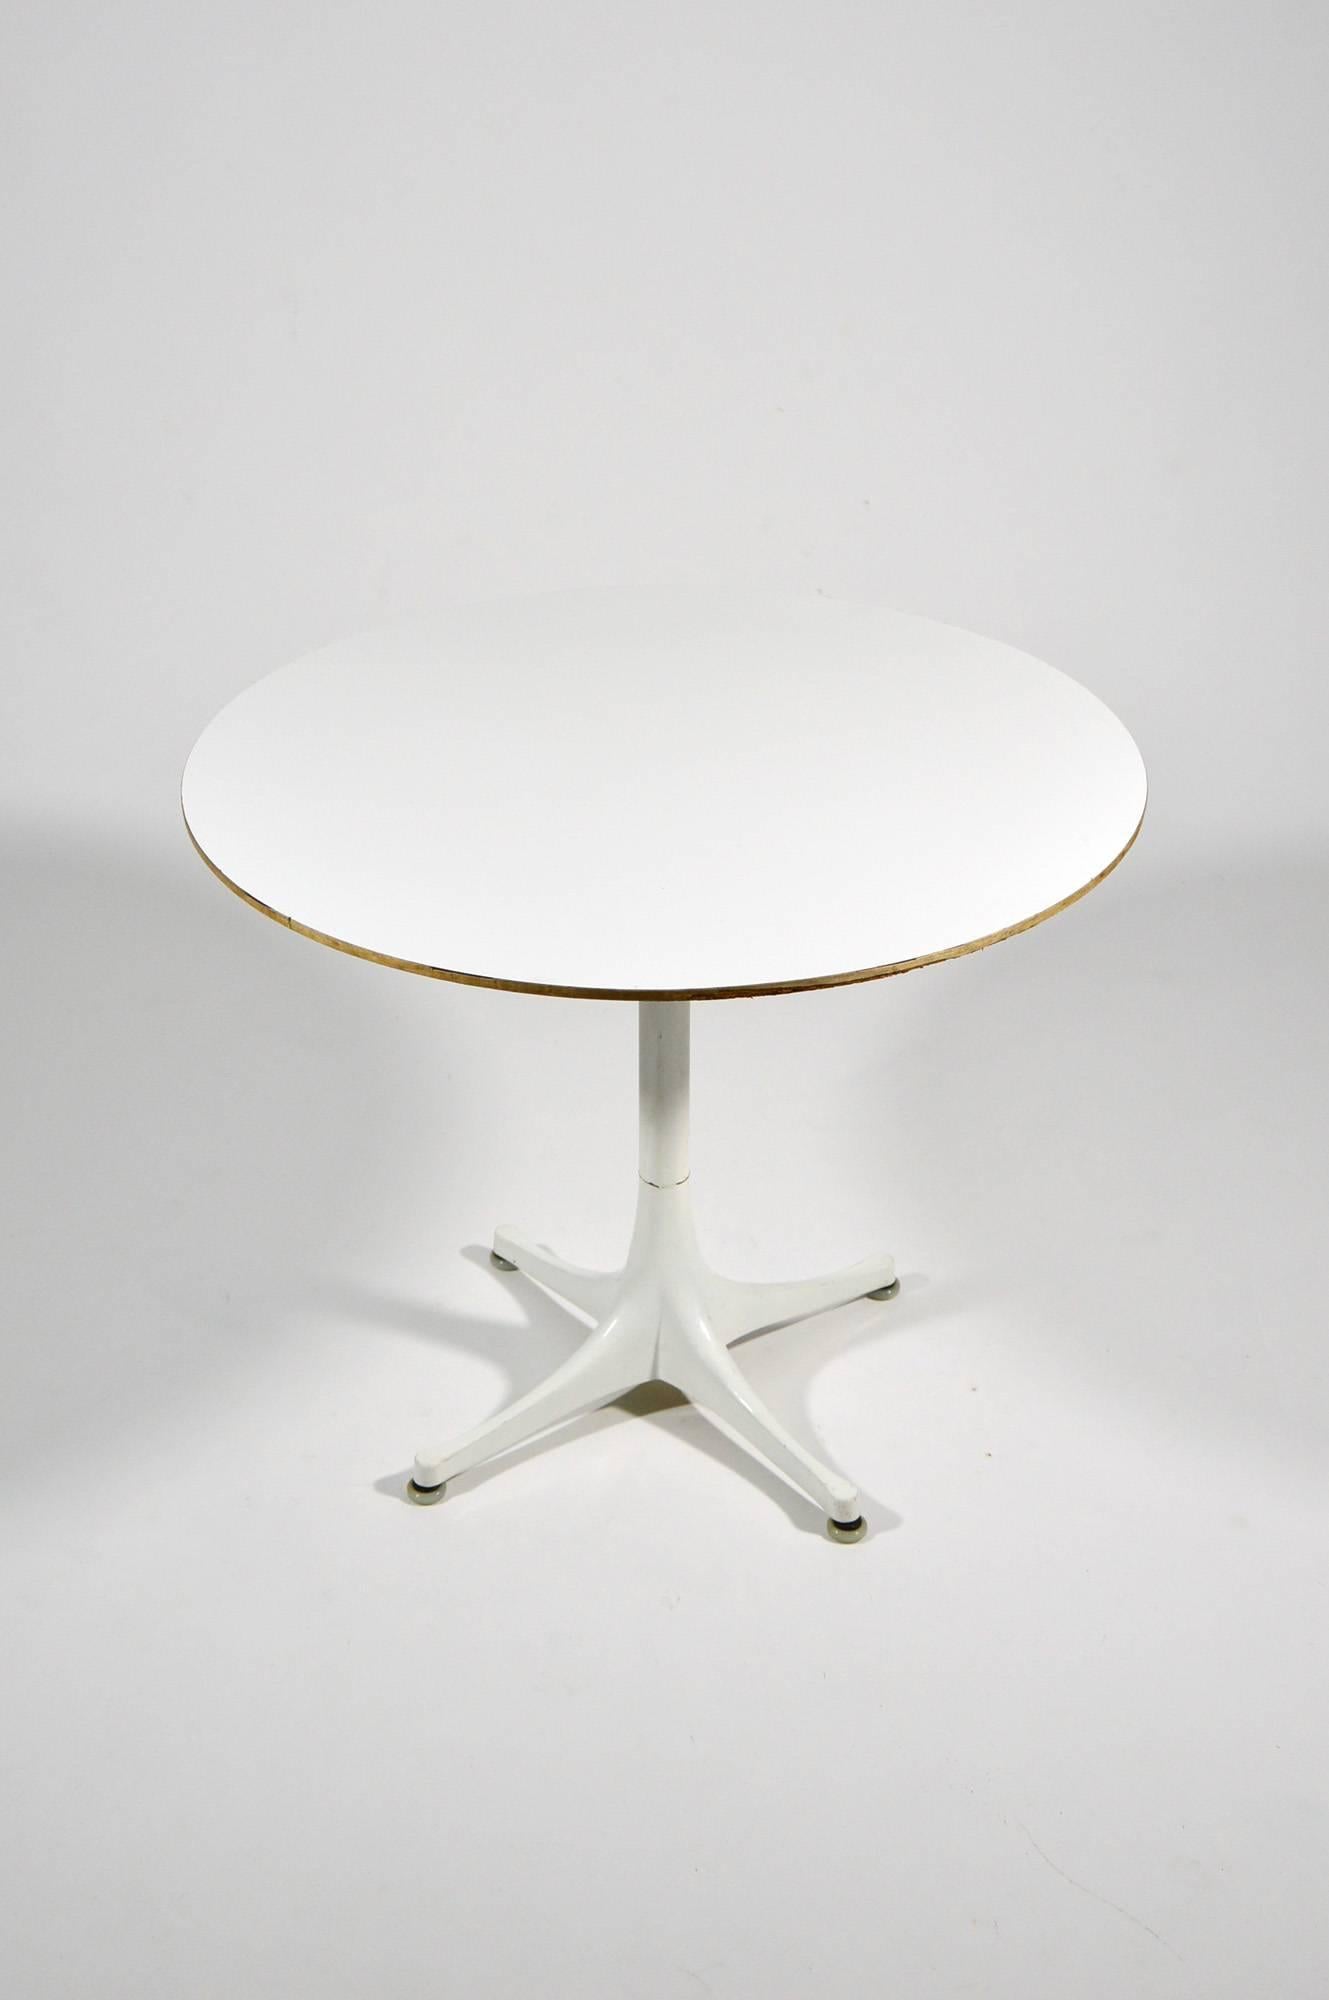 Pedestal table, designed by George Nelson for Herman Miller in 1954, with lacquered aluminium base and white laminate chipboard top.
In overall good condition and signed, the chipboard has some defects.